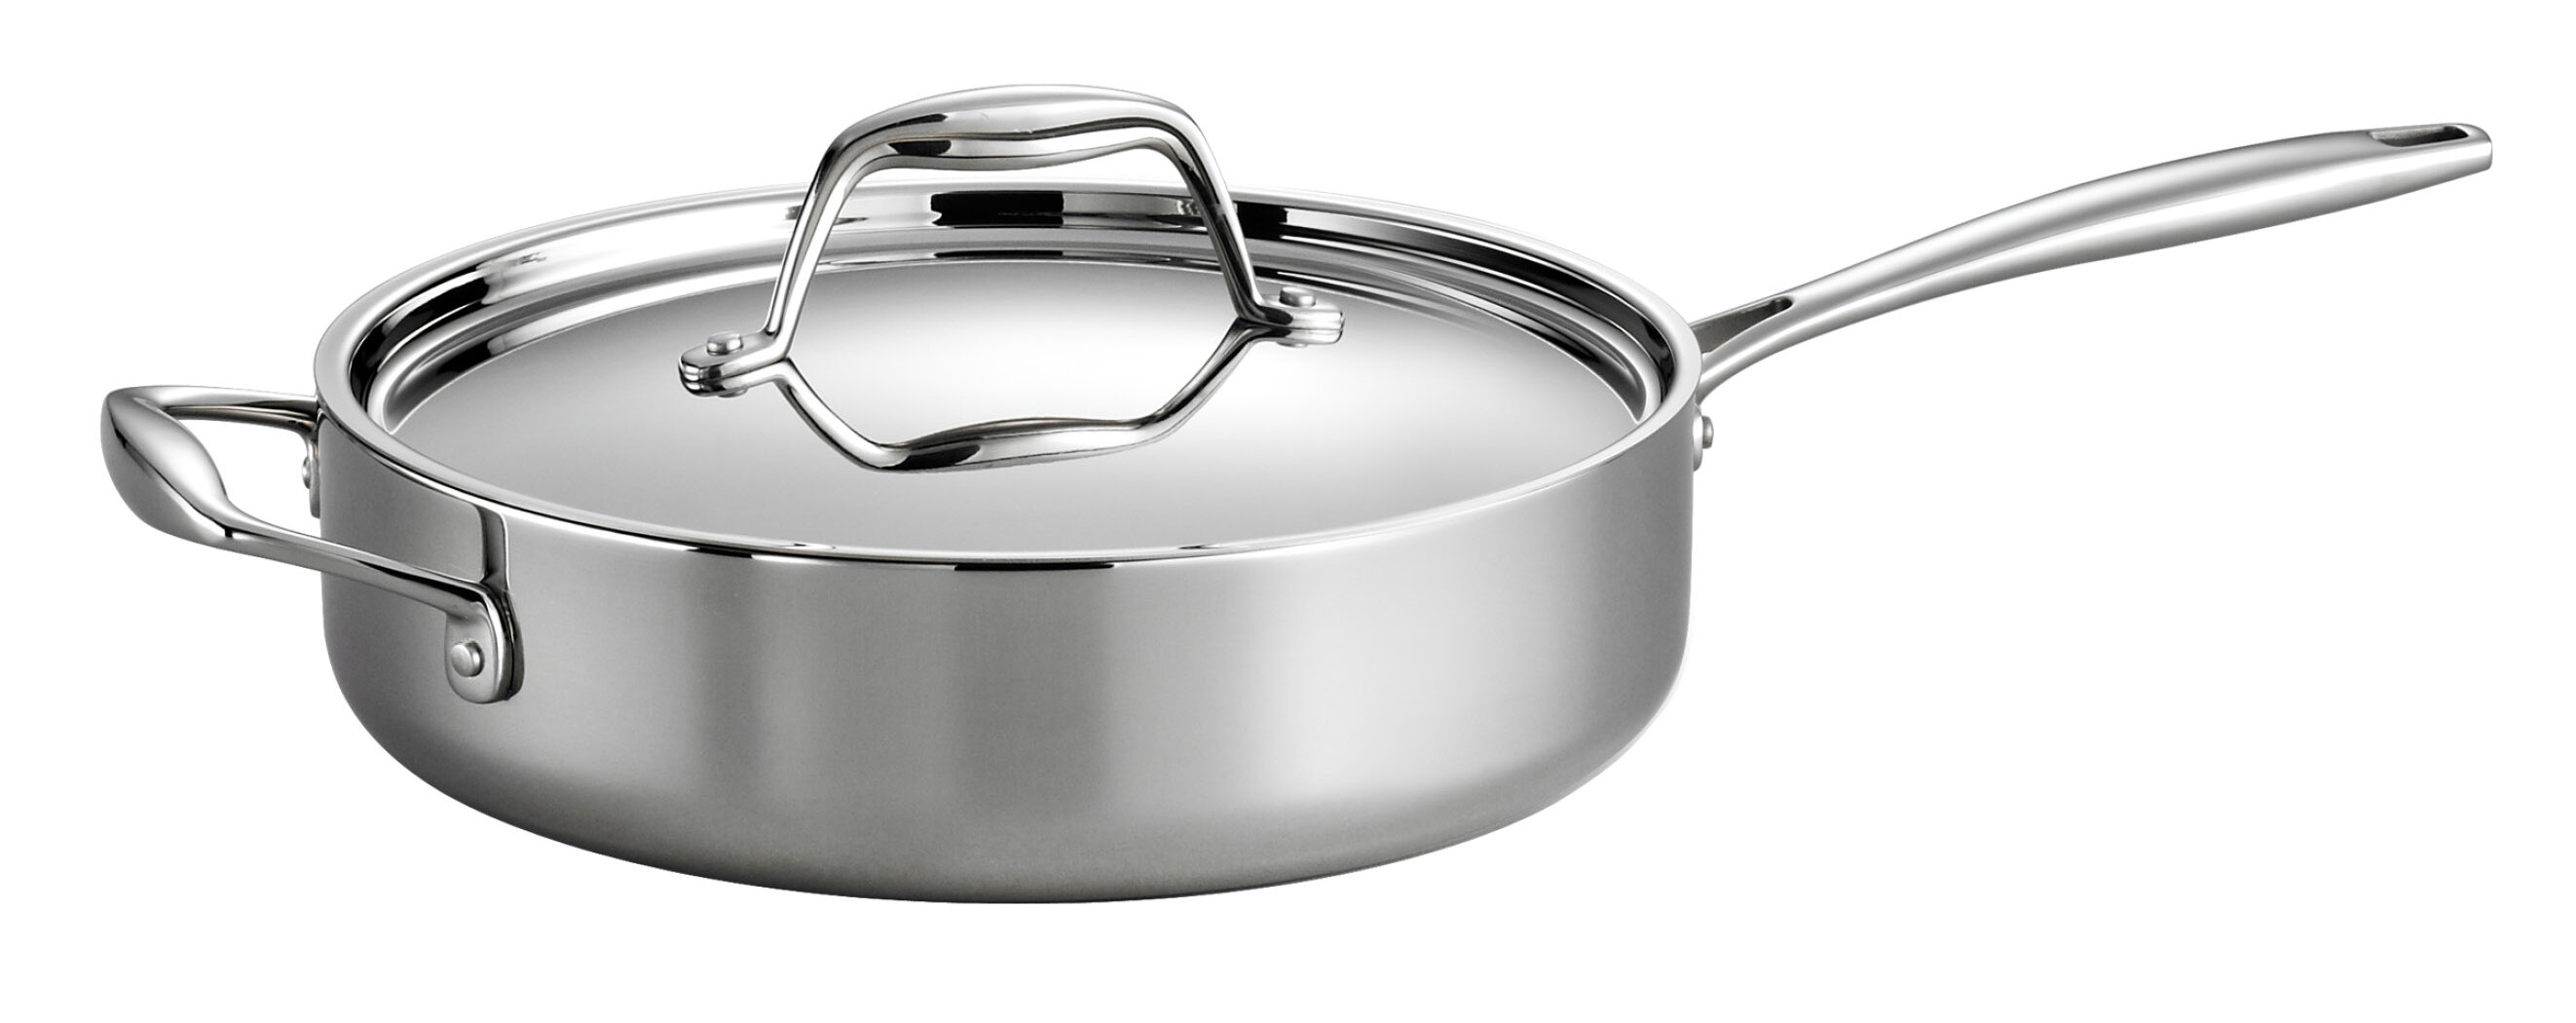 MultiClad Pro Triple Ply Stainless Cookware 3 Quart Saucepan